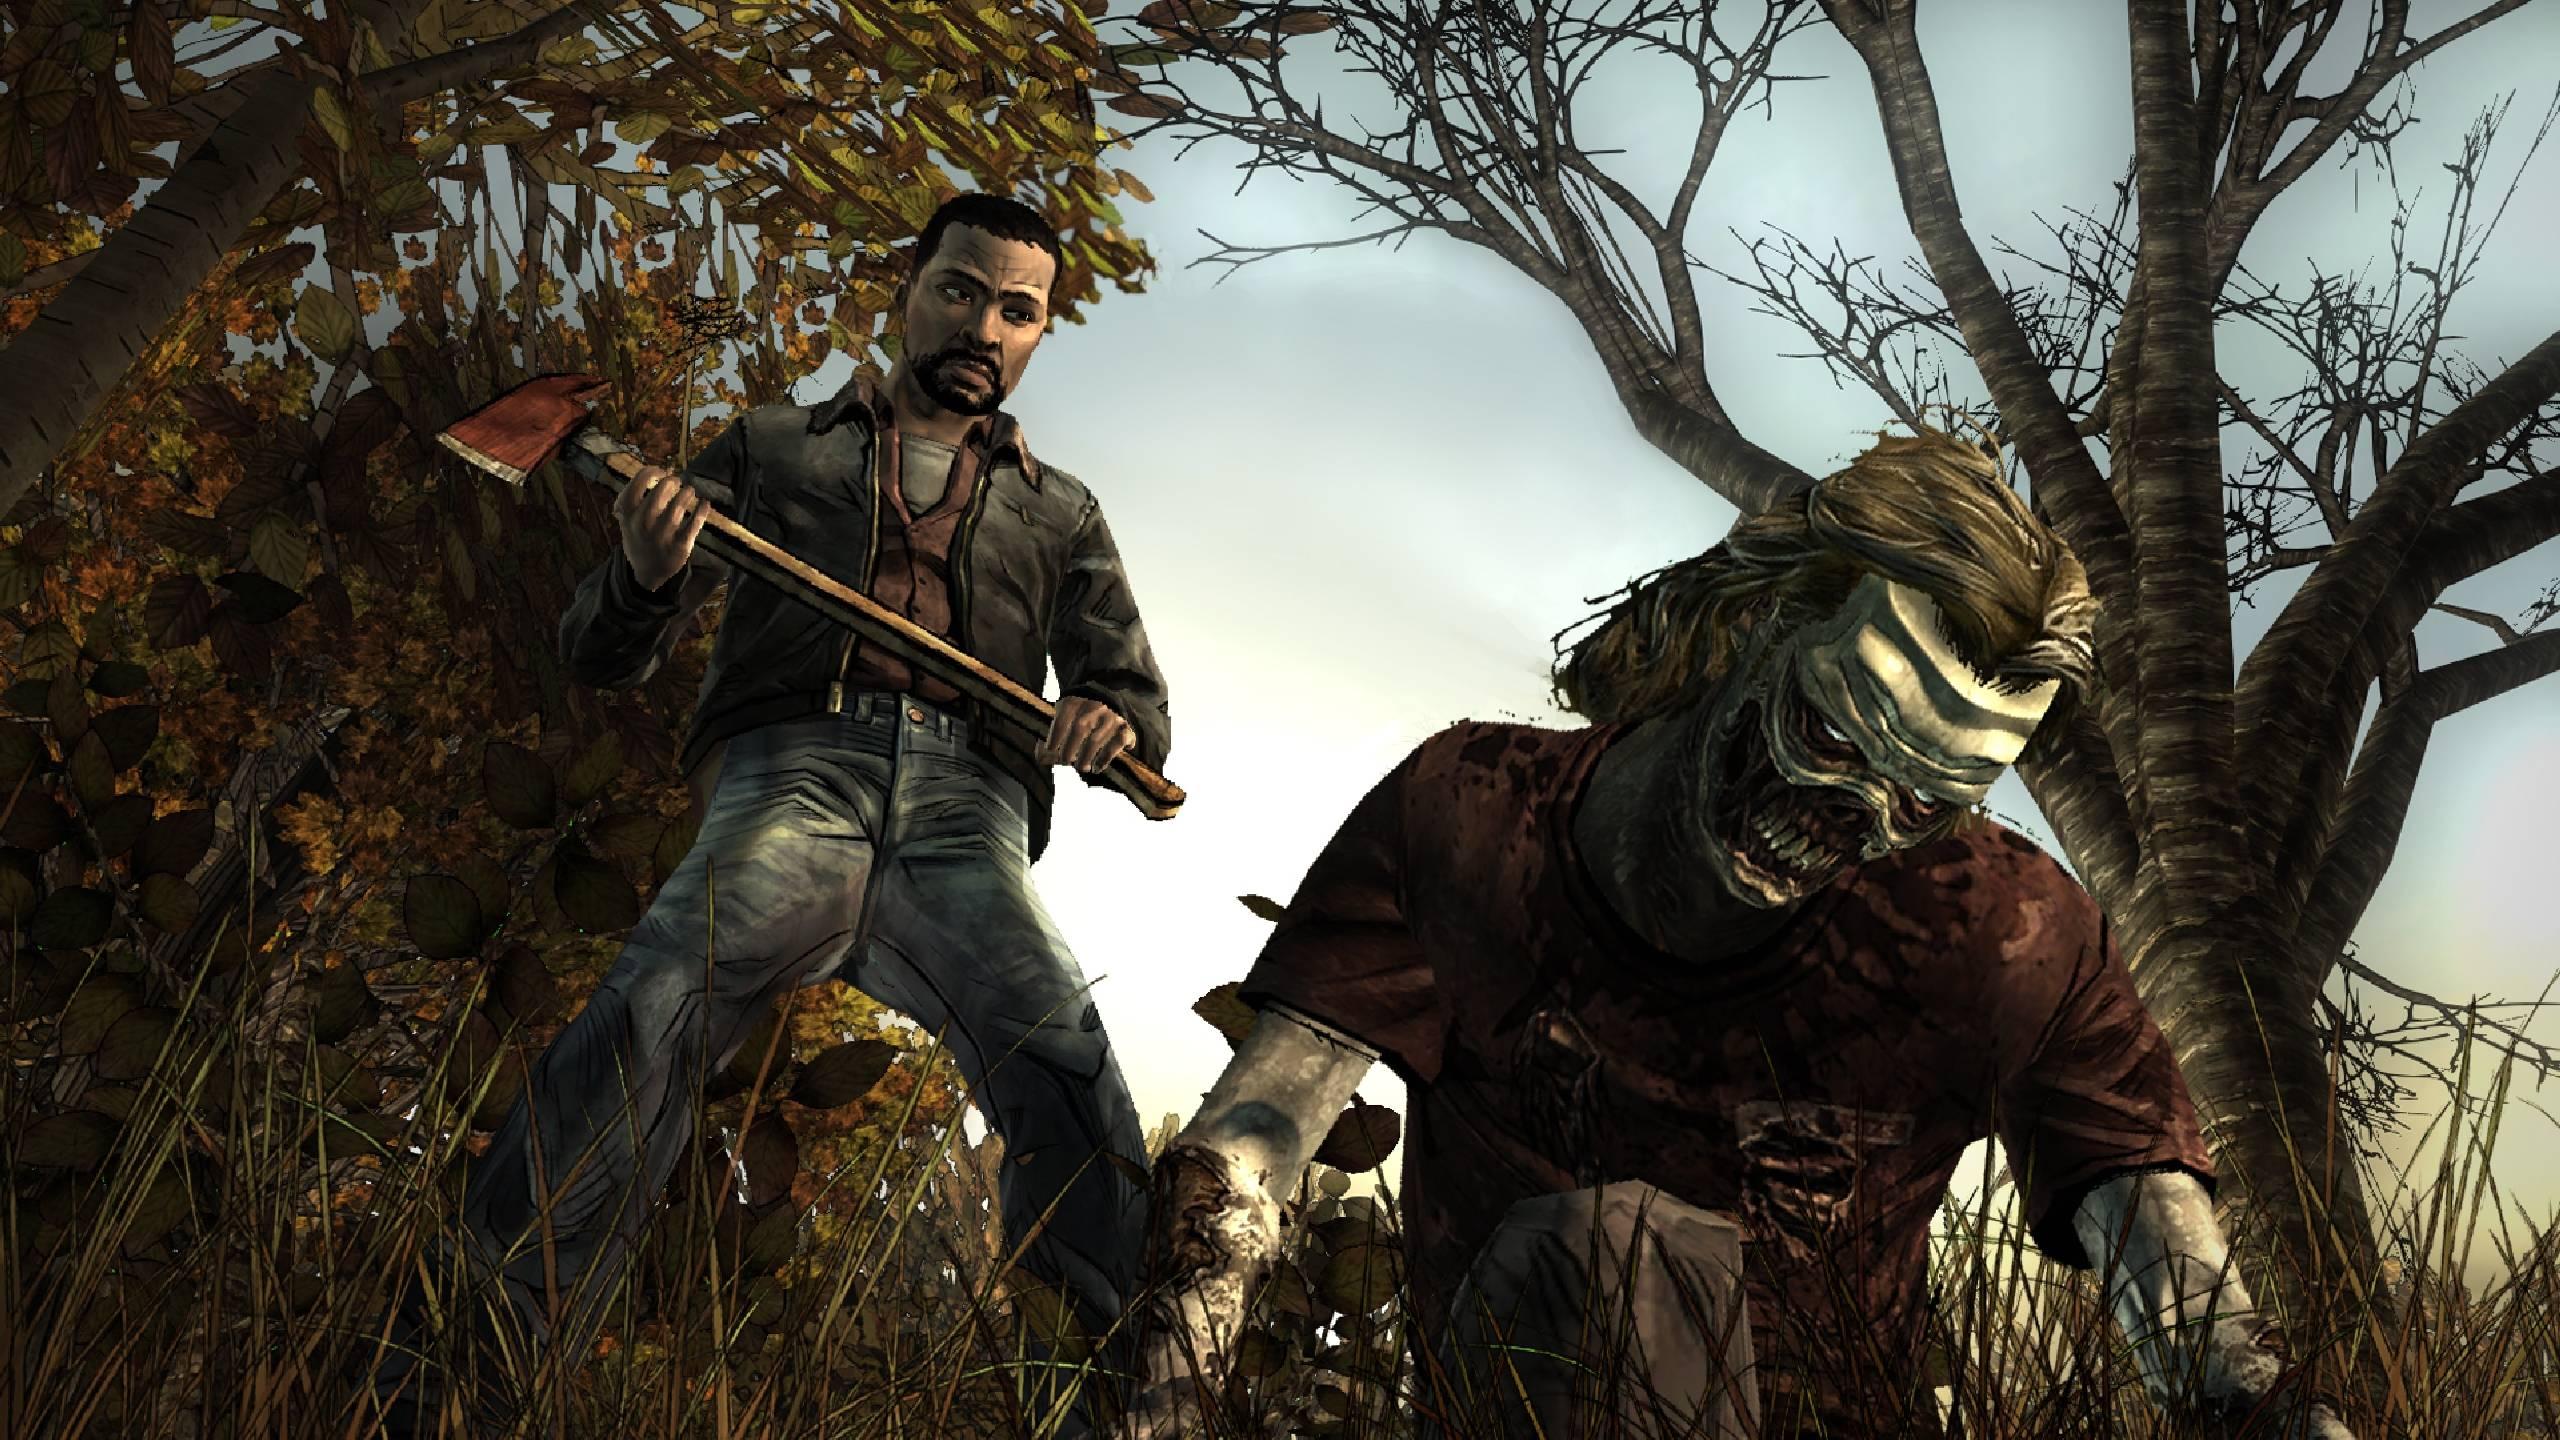 2560 x 1440 · jpeg - The Walking Dead Game Wallpapers - Wallpaper Cave